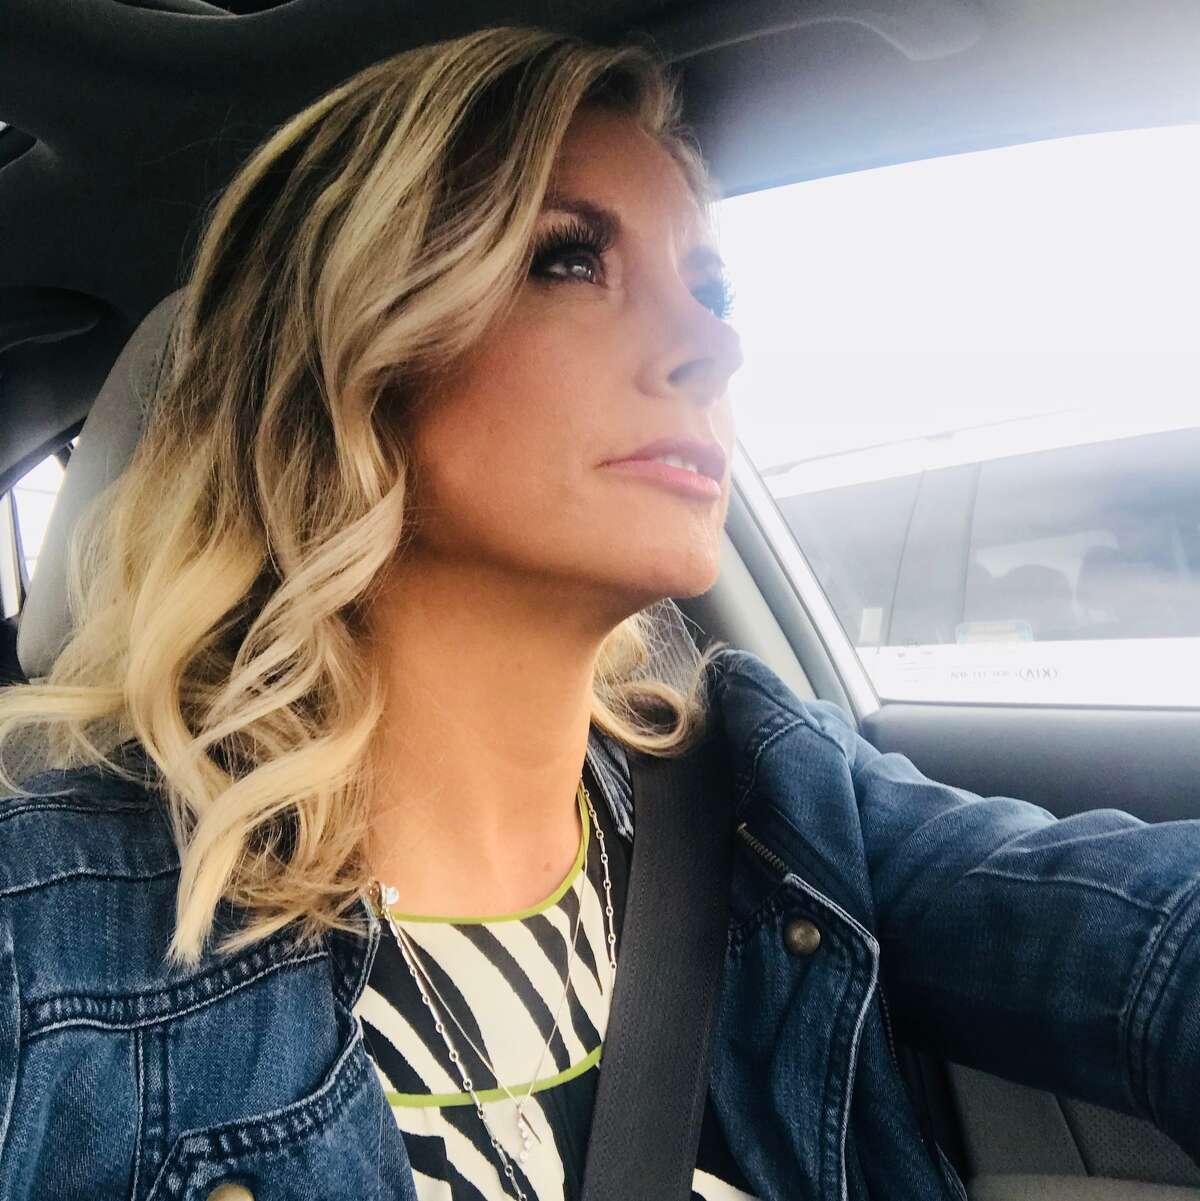 Click through the slideshow for 20 things you don't know about real estate salesperson and social media personality Samantha Parker.